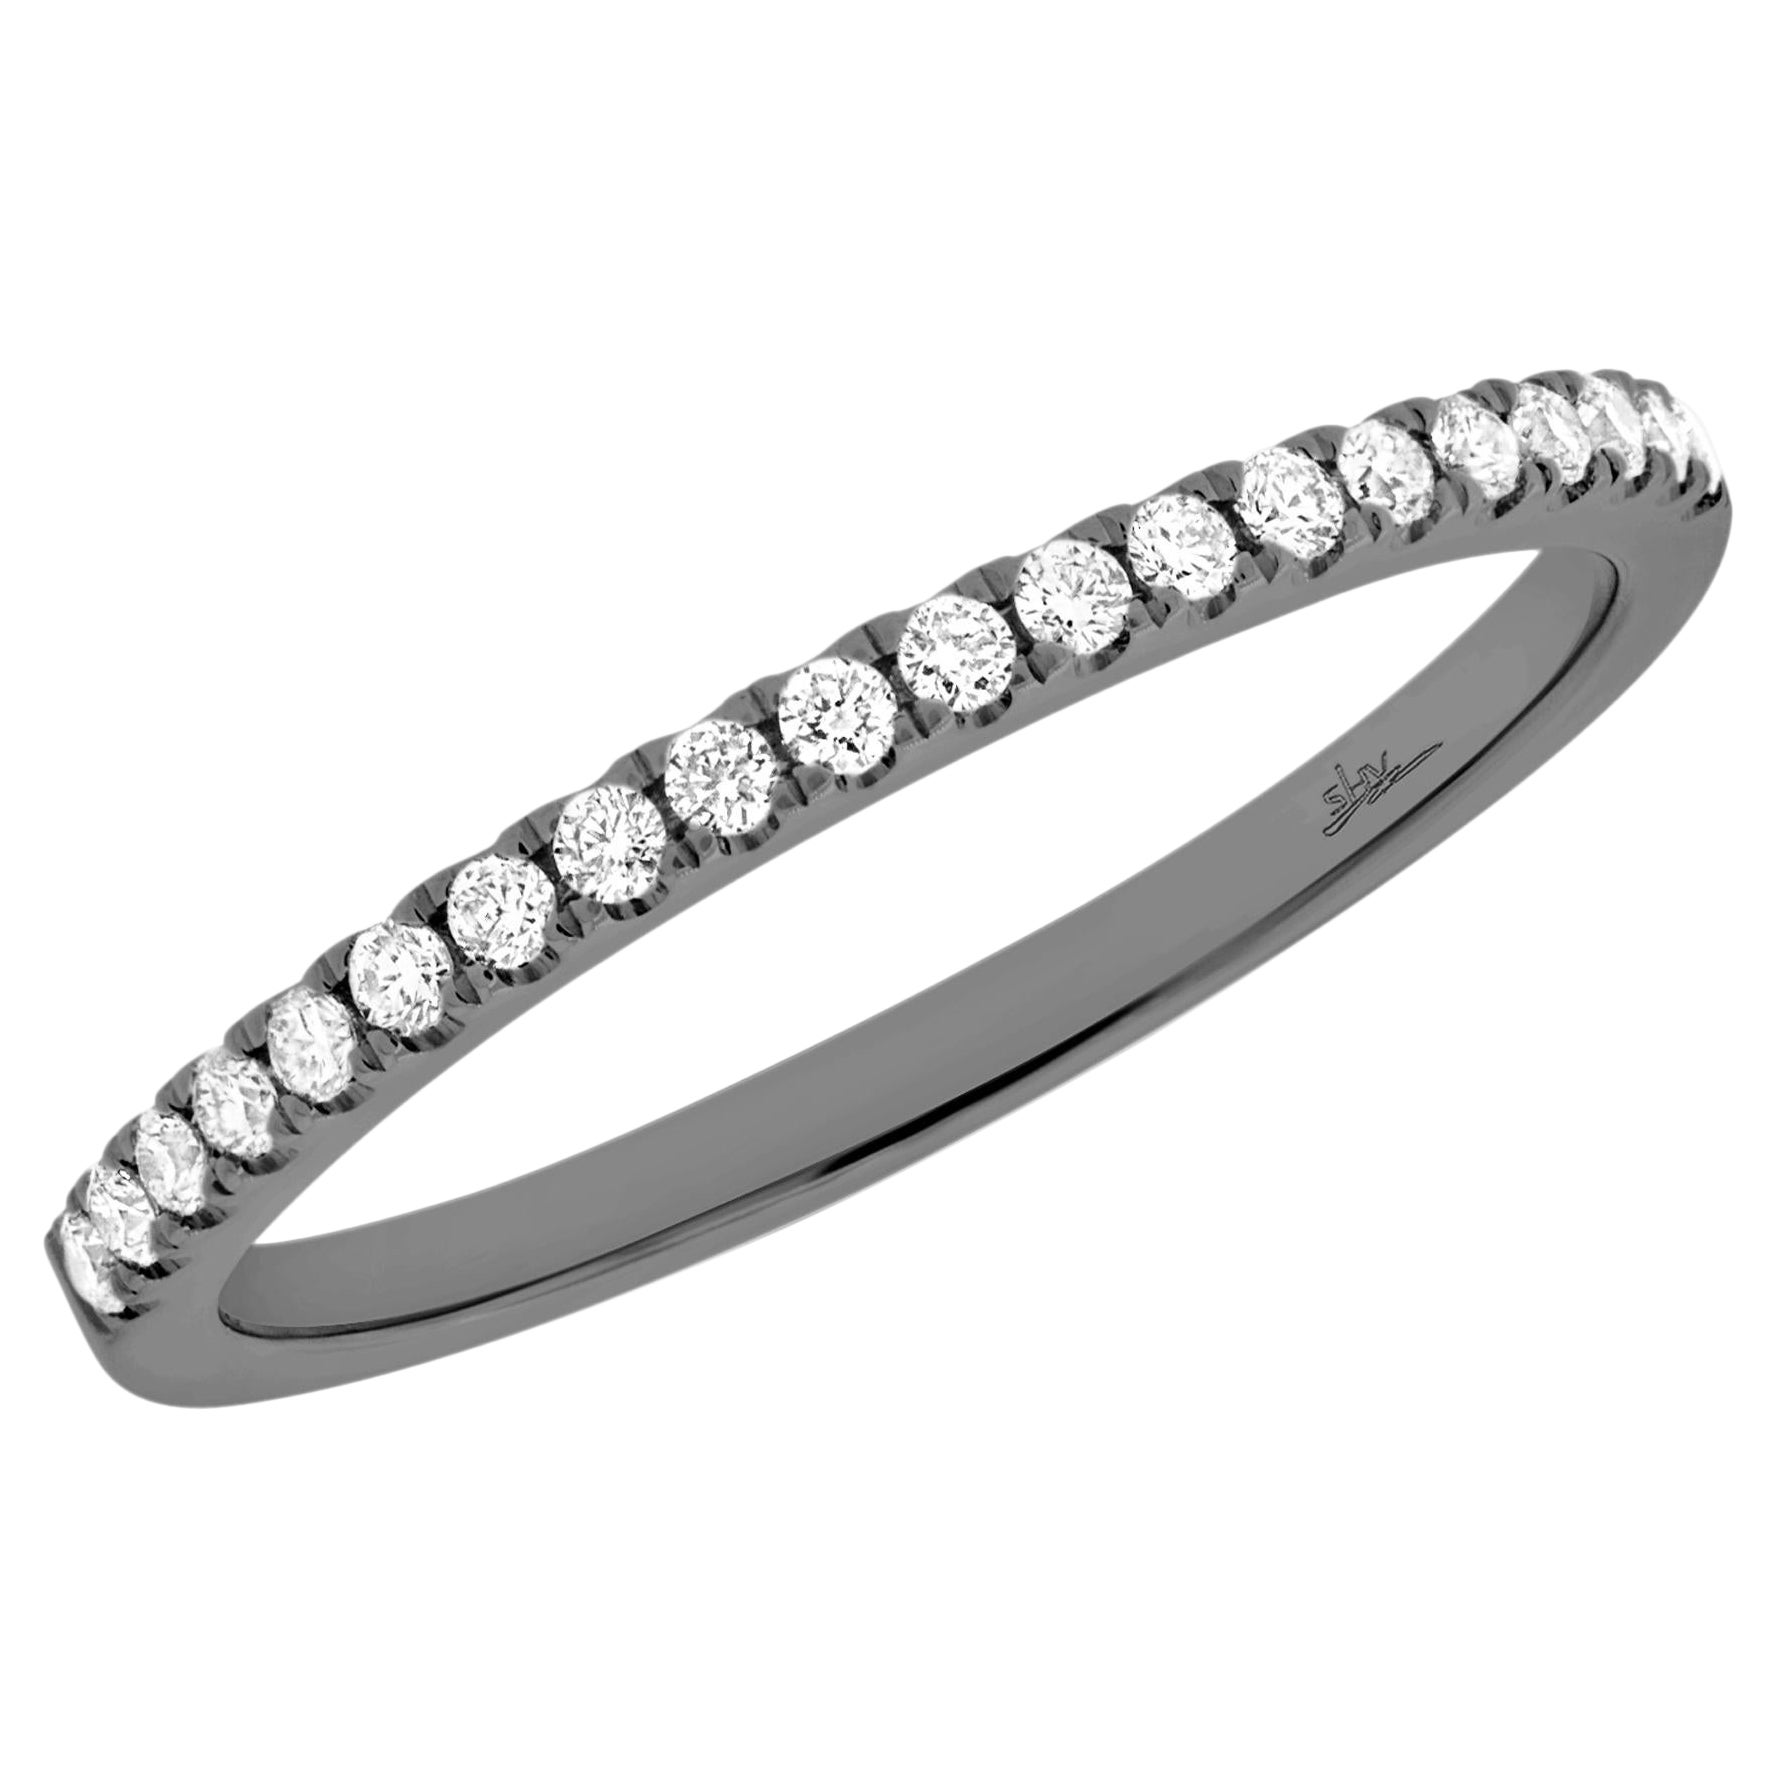 Black Rhodium Plated Diamond Ladies Band Ring 14K White Gold 0.18cttw For Sale